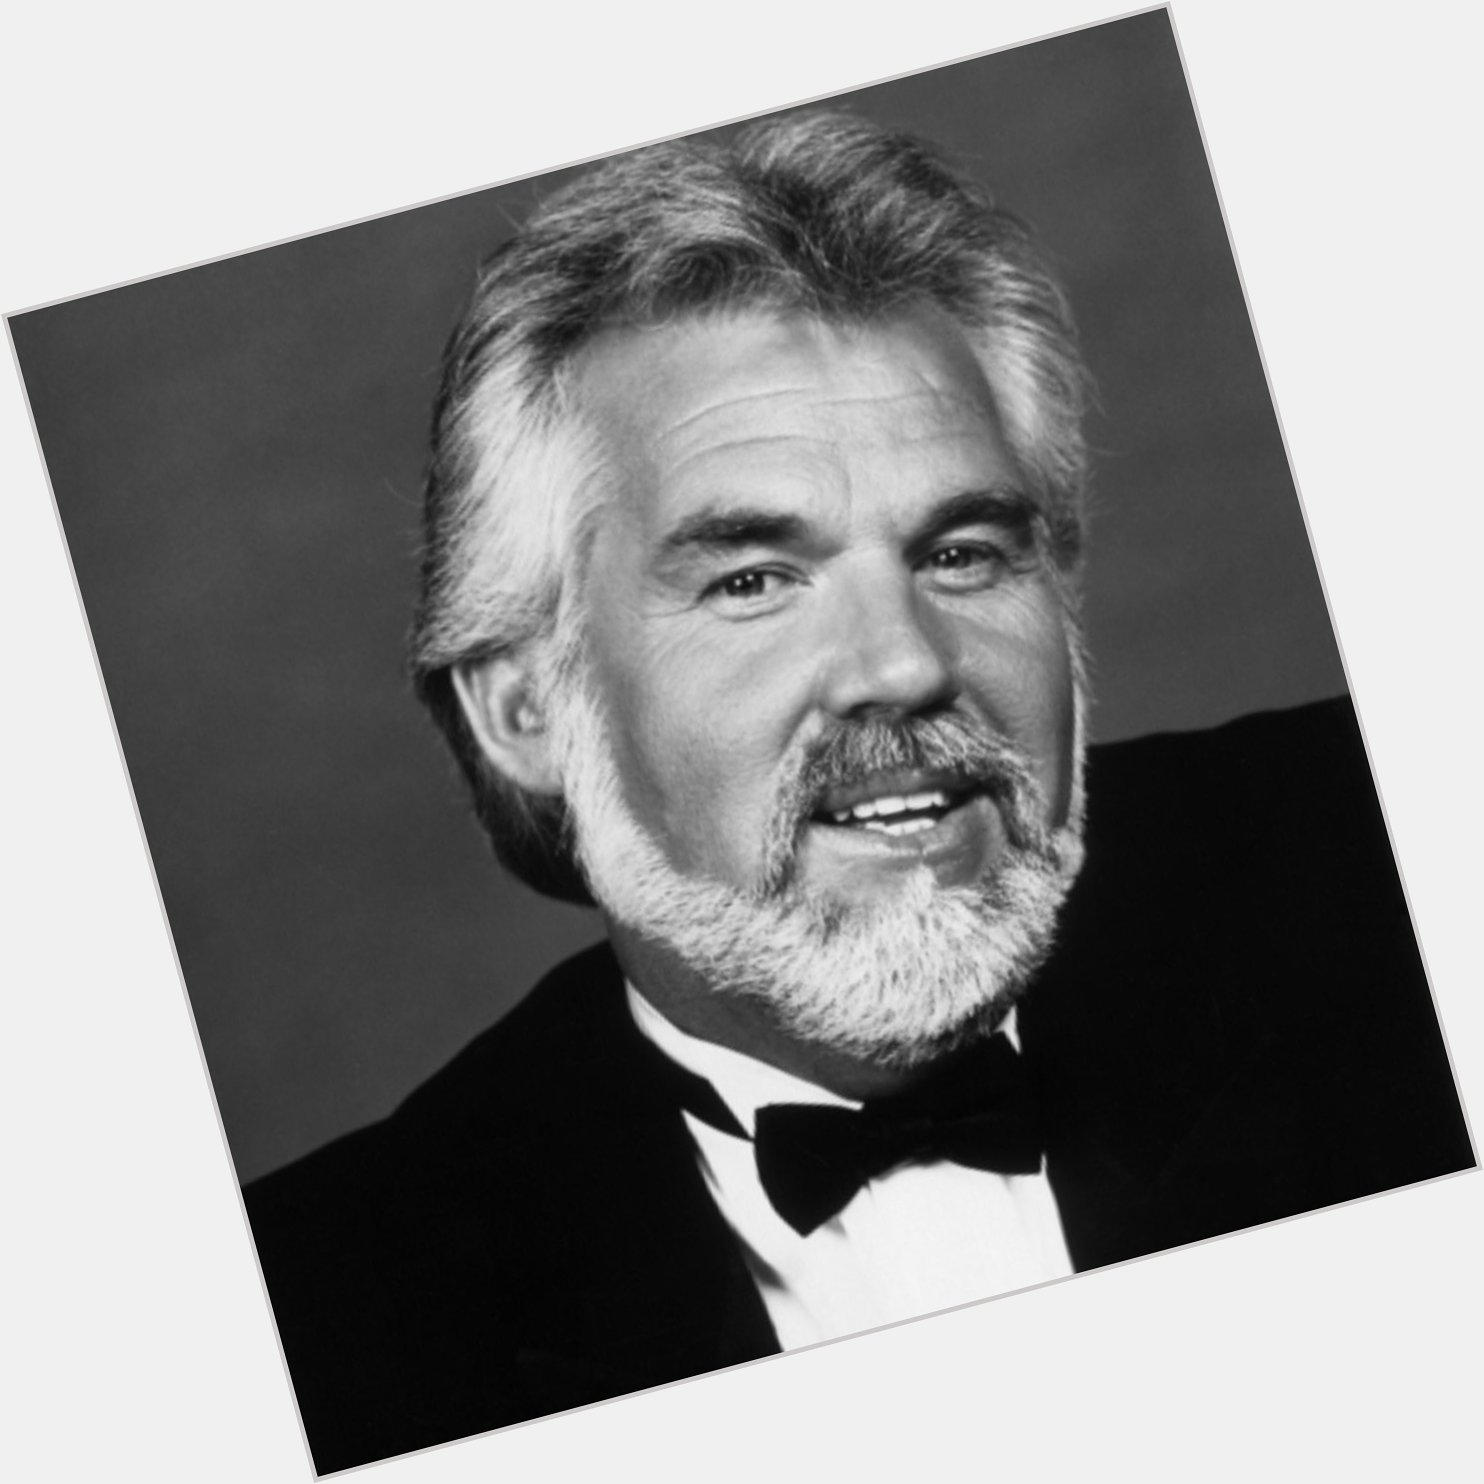 Happy Birthday to Kenny Rogers, born this day in 1938 